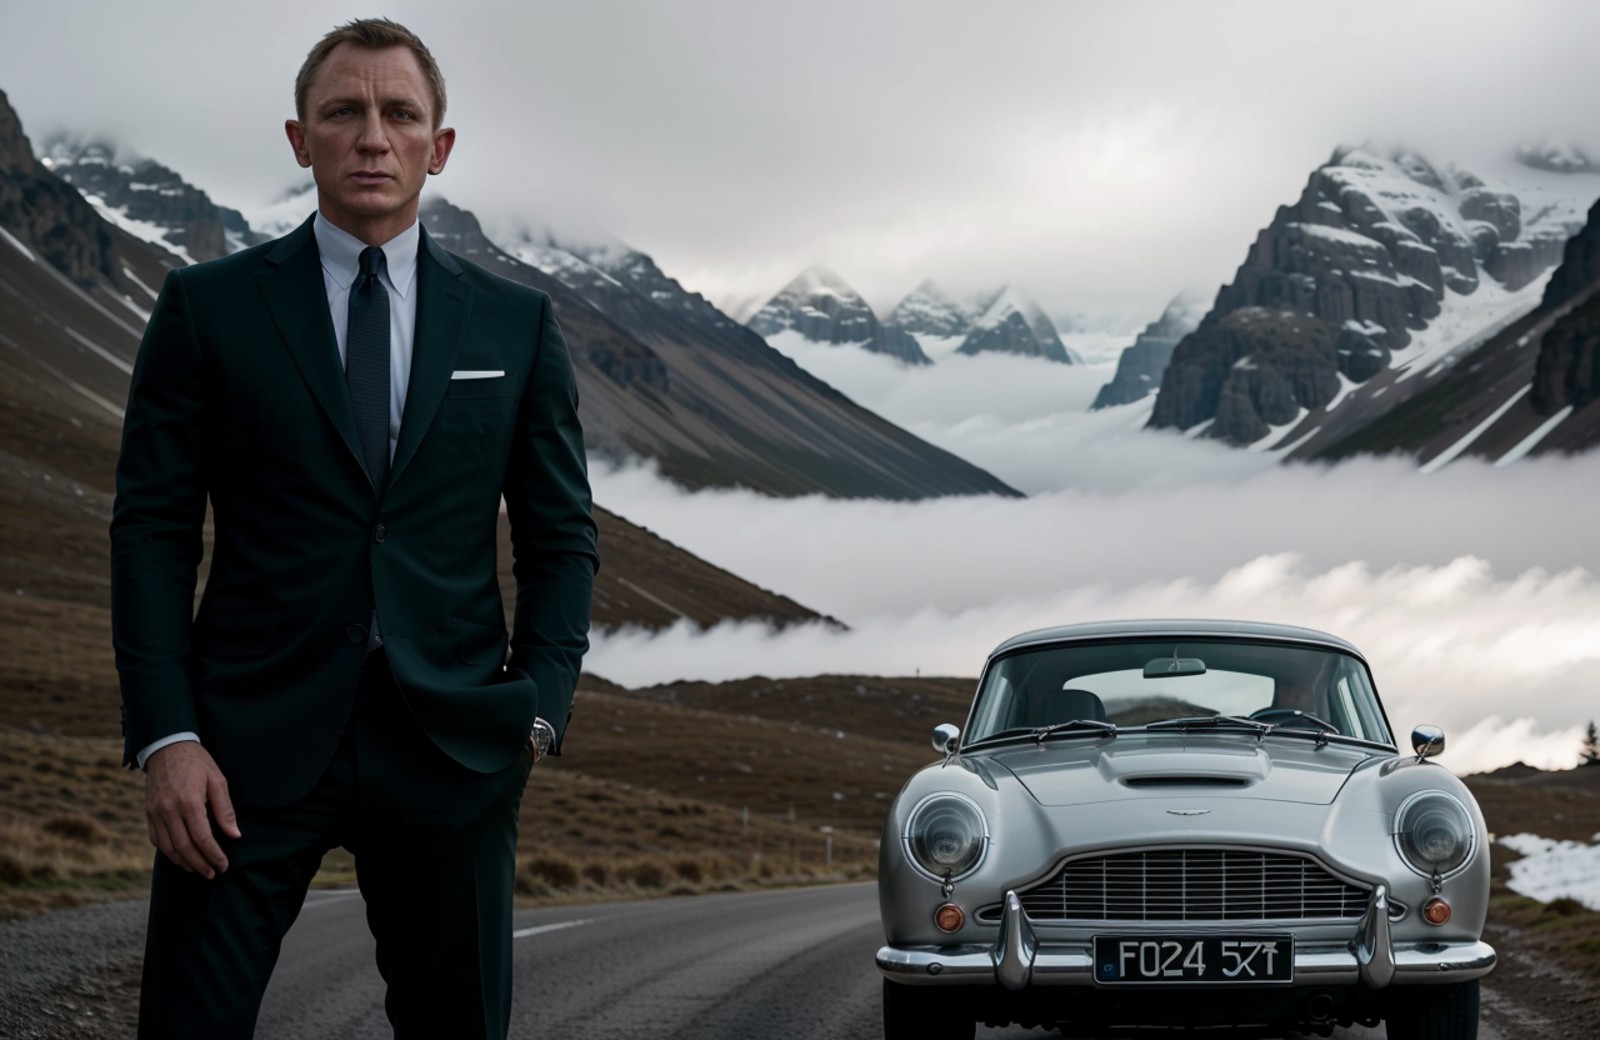 award winning (portrait photo:1.4) of a handsome man, 007danielcraig, dressed in a white suit, standing beside a silver As...